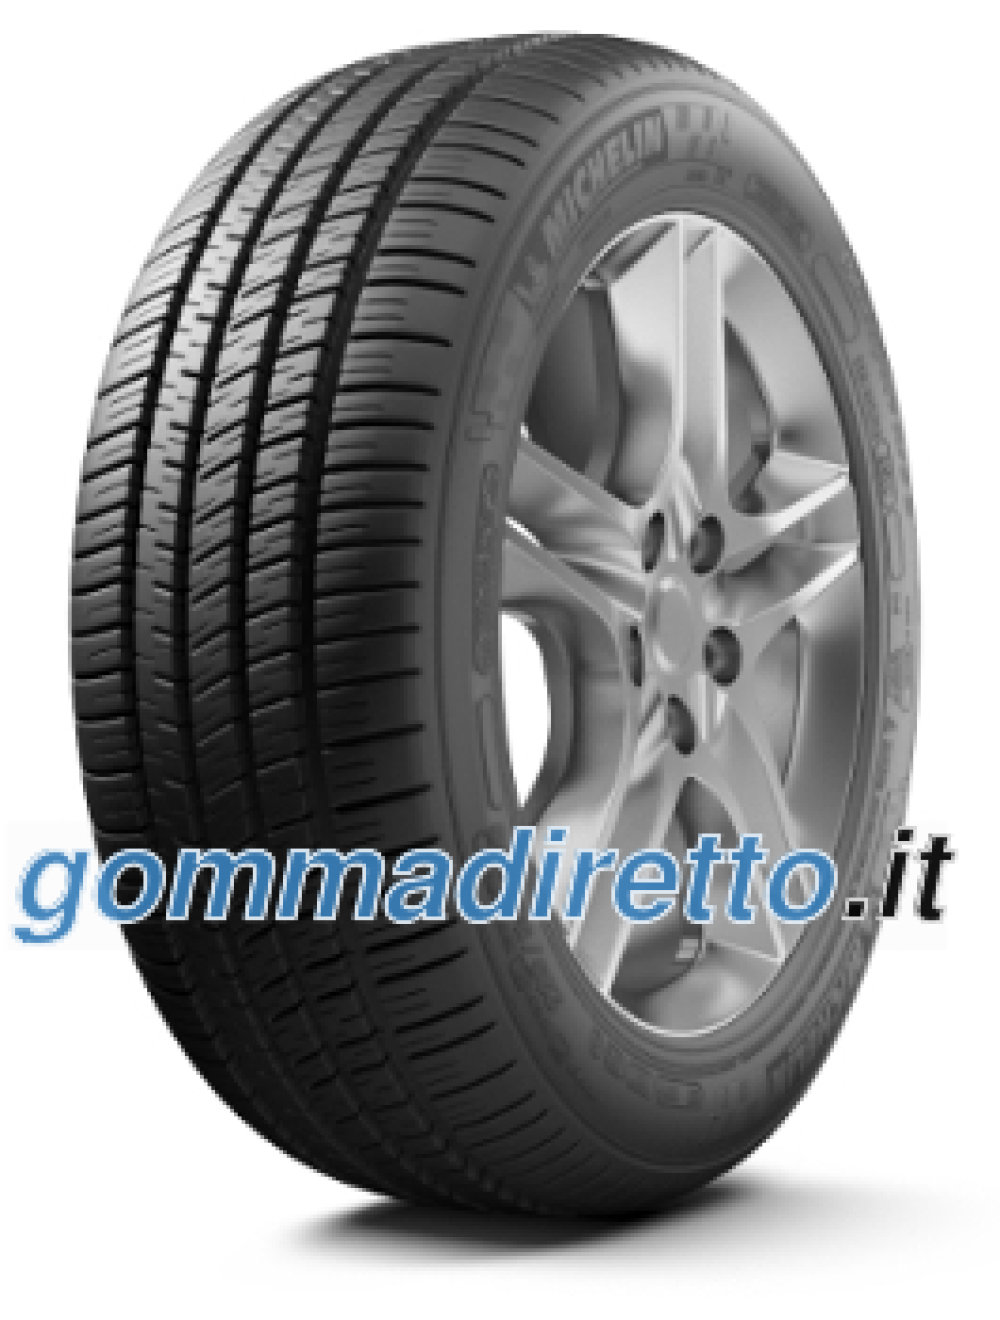 Image of Michelin Pilot Sport A/S 3 ( 315/35 R20 110V XL, N0 )